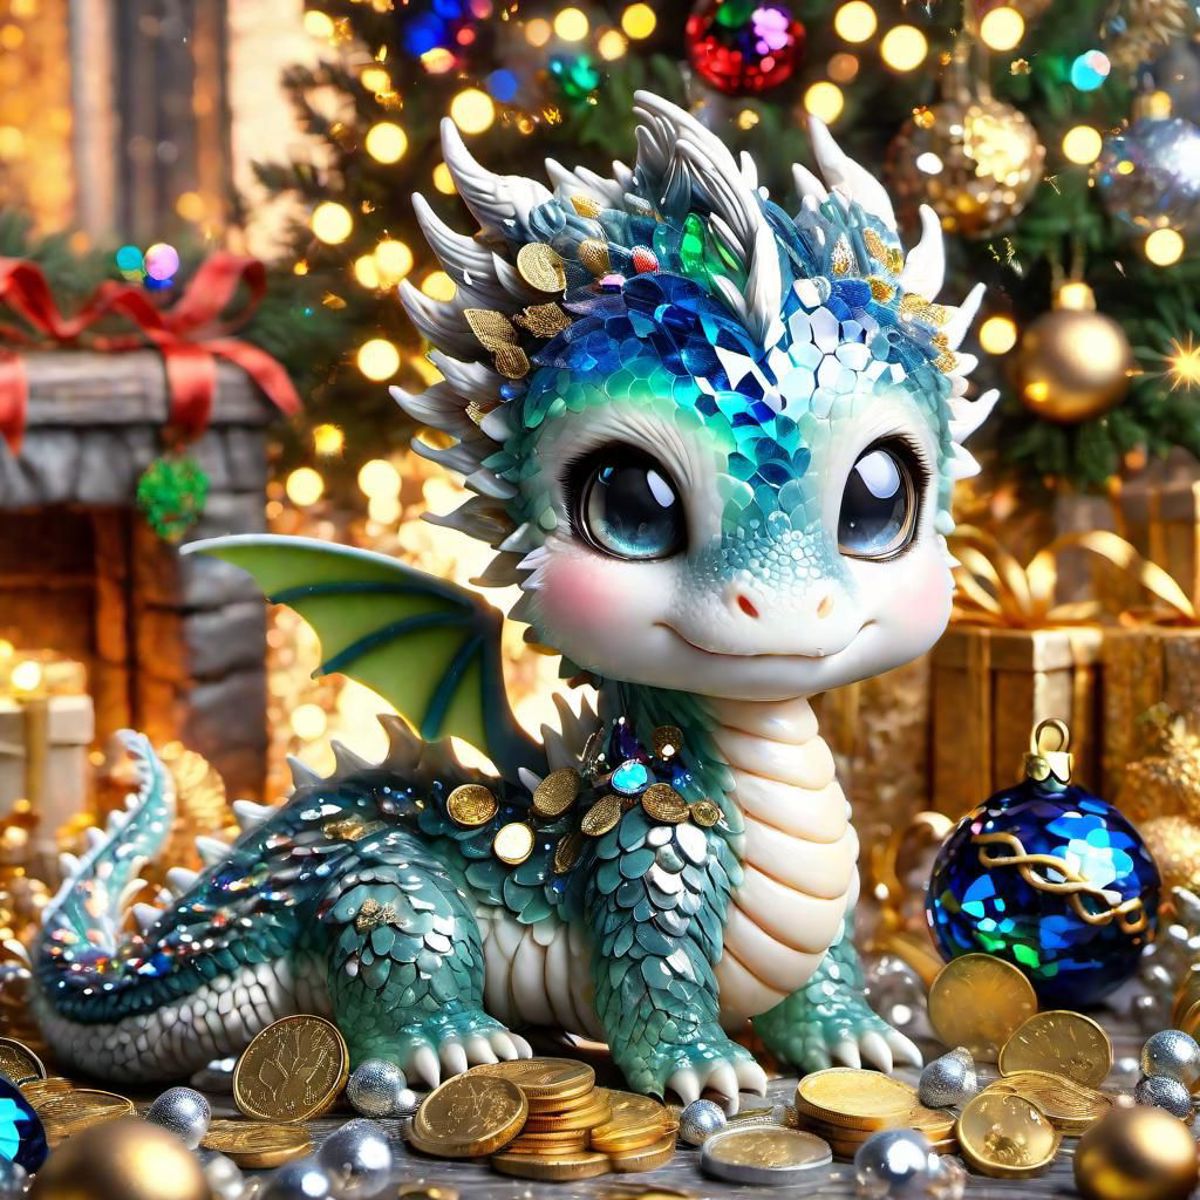 A cute baby dragon figurine sitting in front of a Christmas tree.